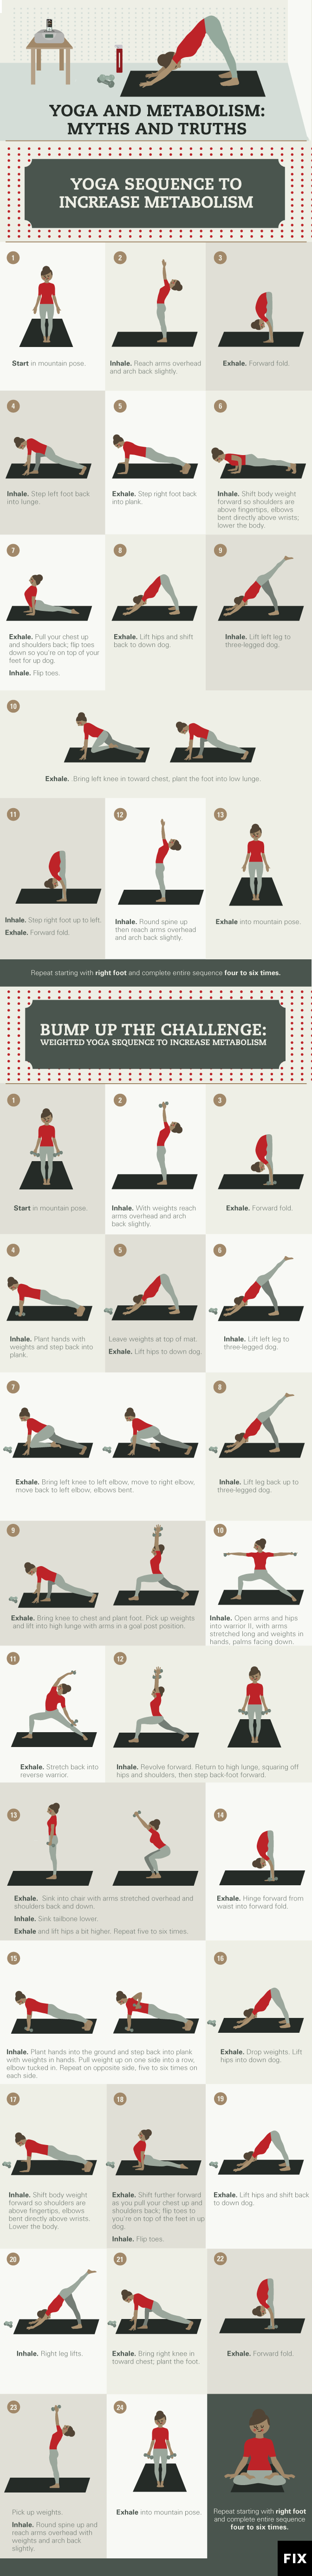 Myth and Reality: Facts About Yoga - Infographic